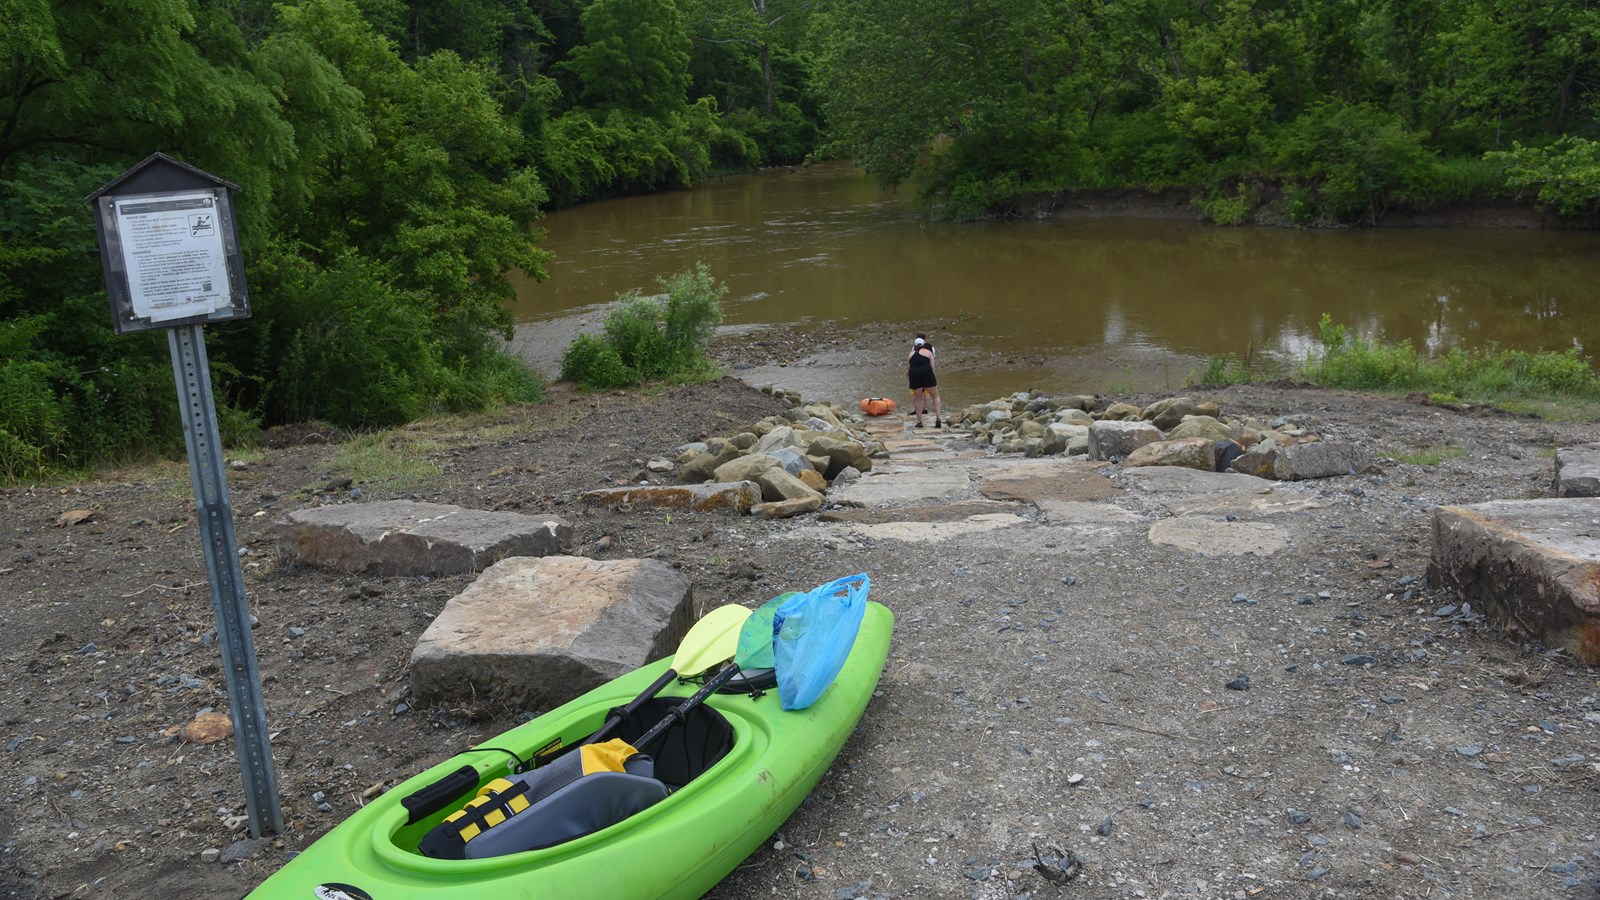 A green kayak rests by a trail sign overlooking the junction of two waterways. Two people pull an or